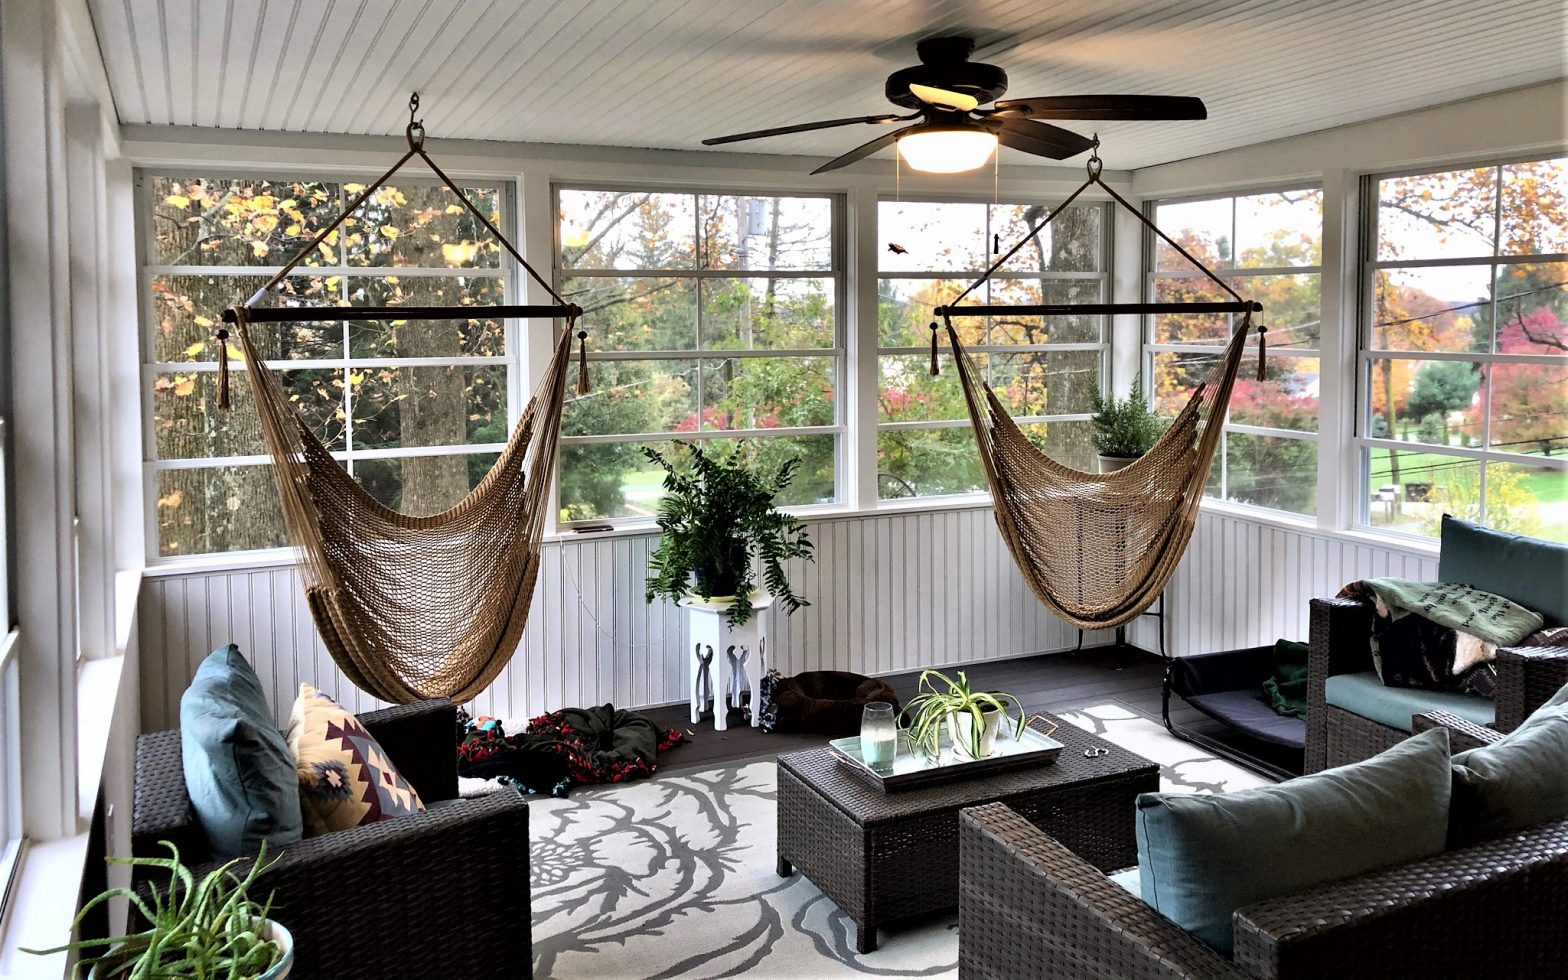 Interior of a three season room with two hanging hammock chairs